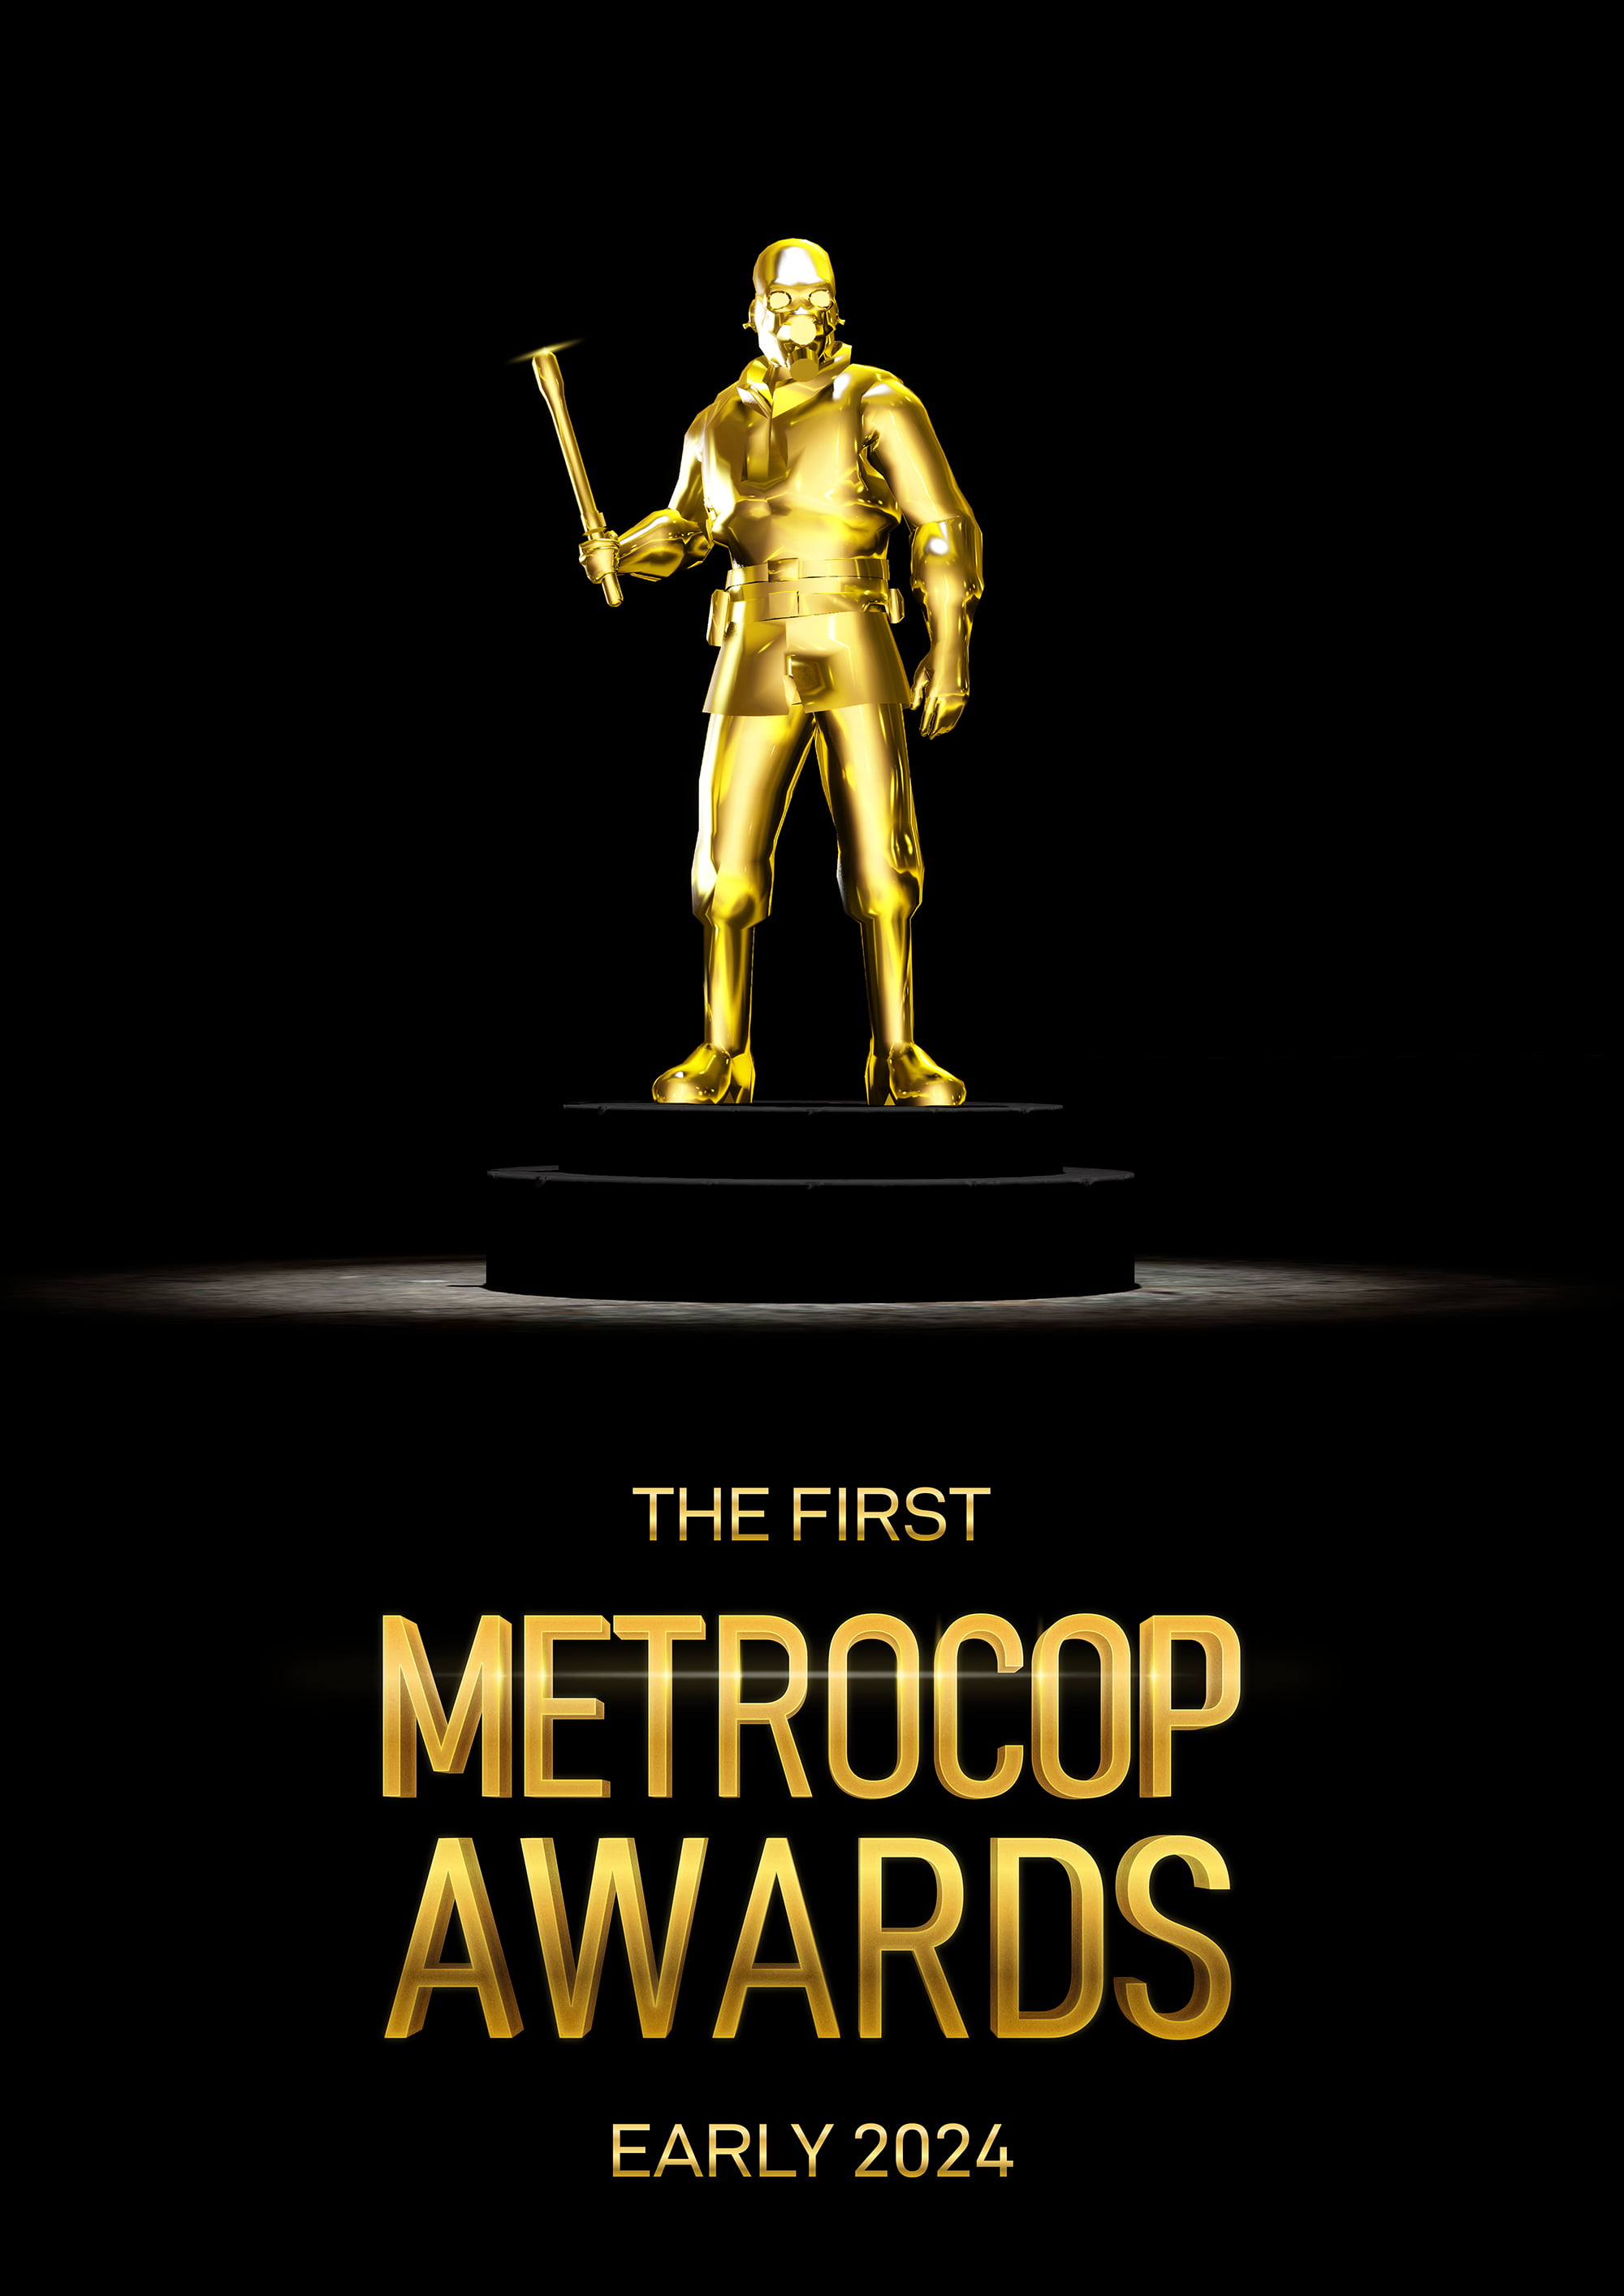 Poster for the first Metrocop Awards, featuring a golden award in the shape of a Combine Civil Protection officer from Half-Life 2 holding a stun stick, with a reference to the date early 2024.